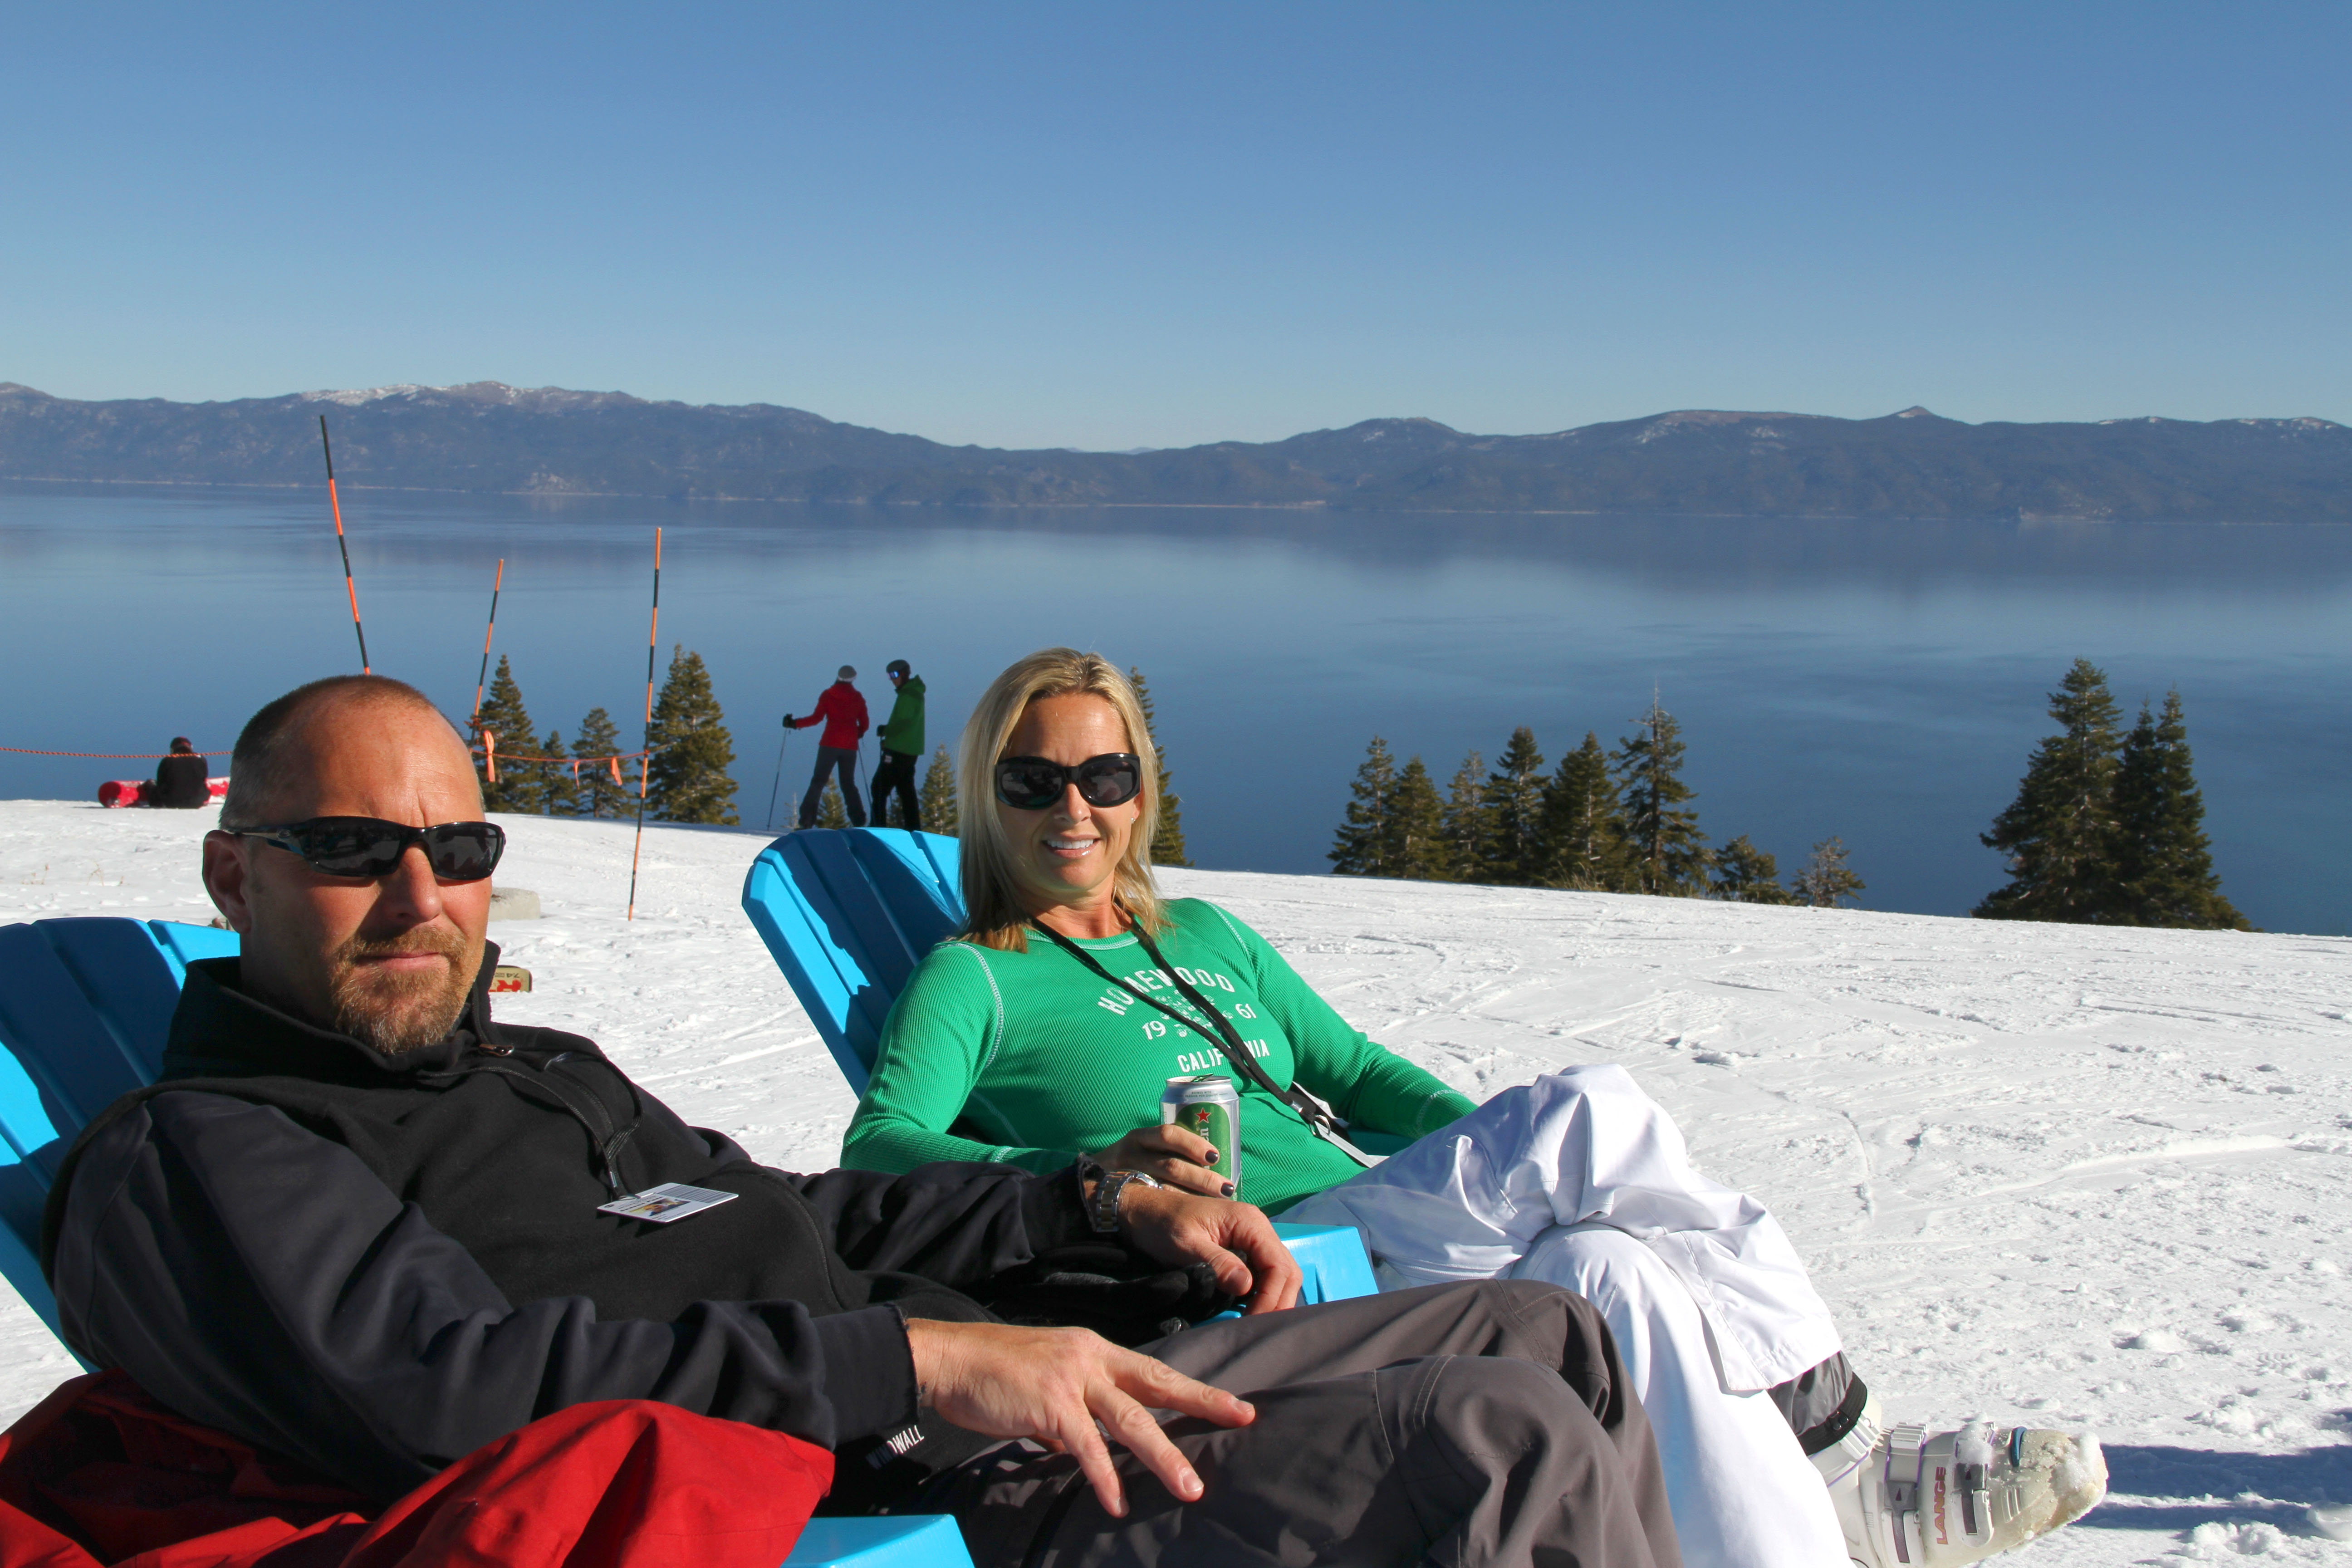 Homewood Mountain Resort has 64 runs and spectacular views of the Lake Tahoe basin from each one of them. (Photo courtesy Homewood Mountain Resort)